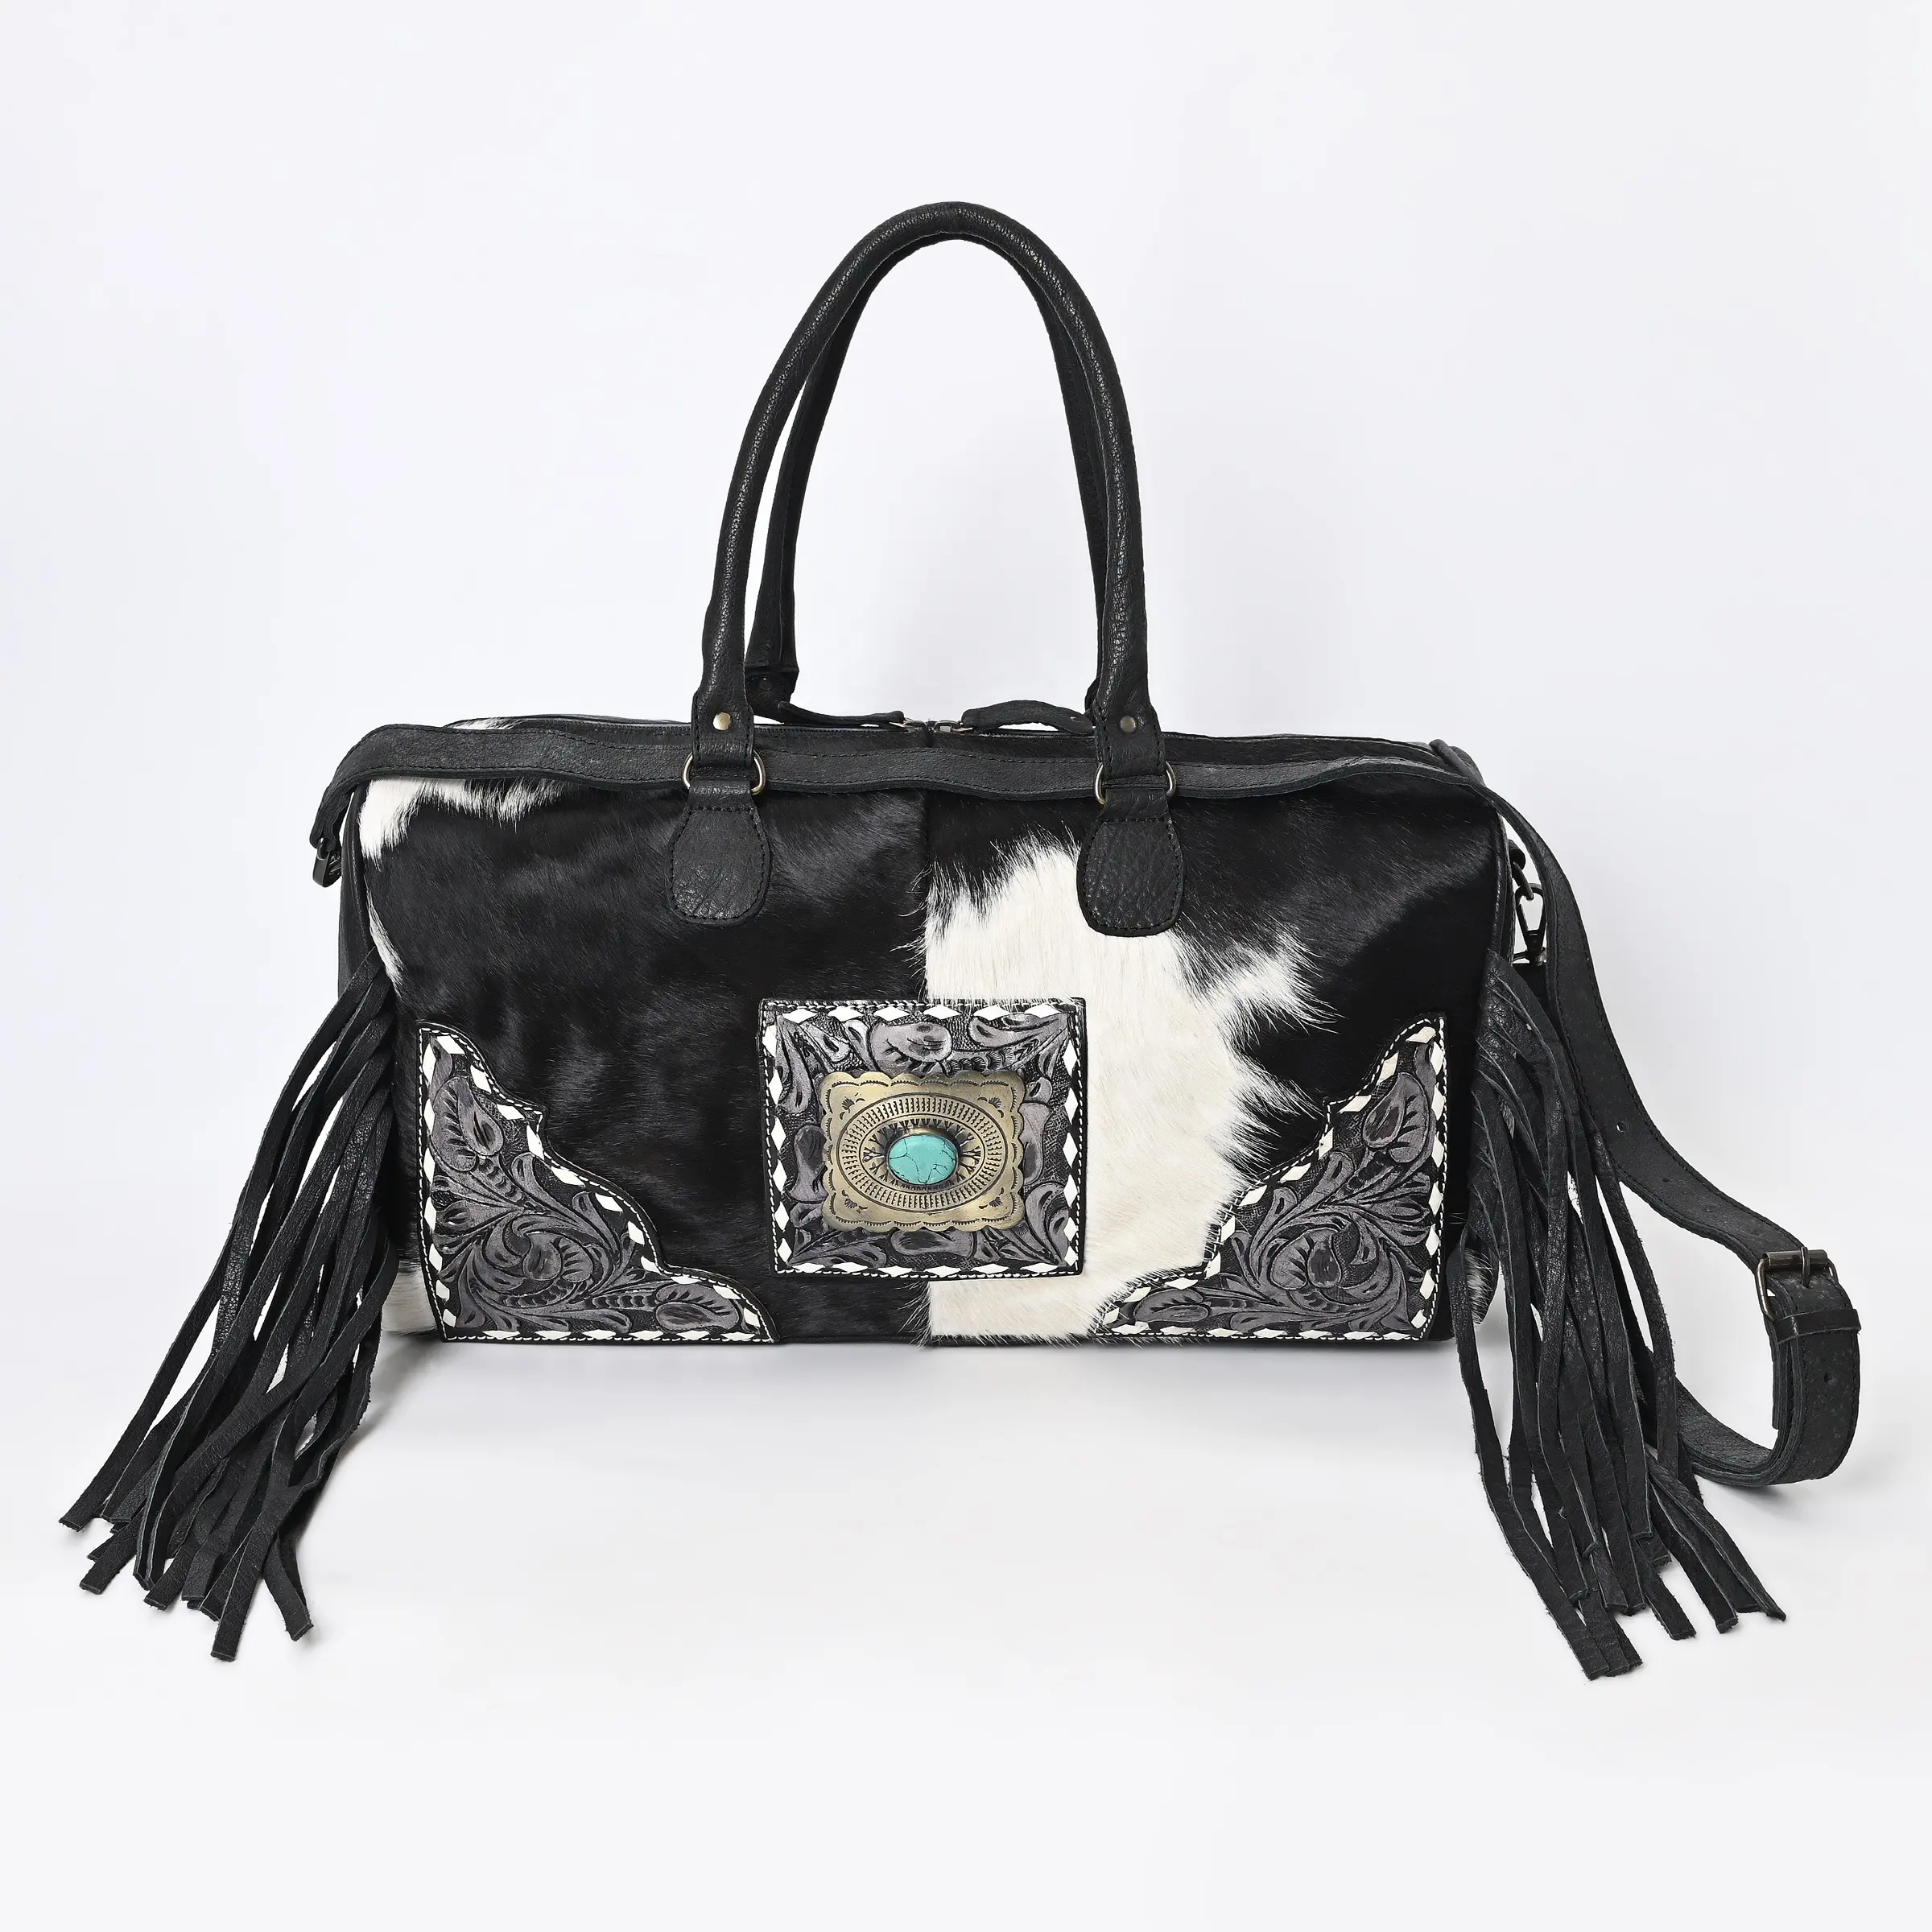 Hairon Leather Duffle Bag With Leather Fringes Rectangular Concho In Middle With Turquoise Stone Azetic Knitted Hand Tooling